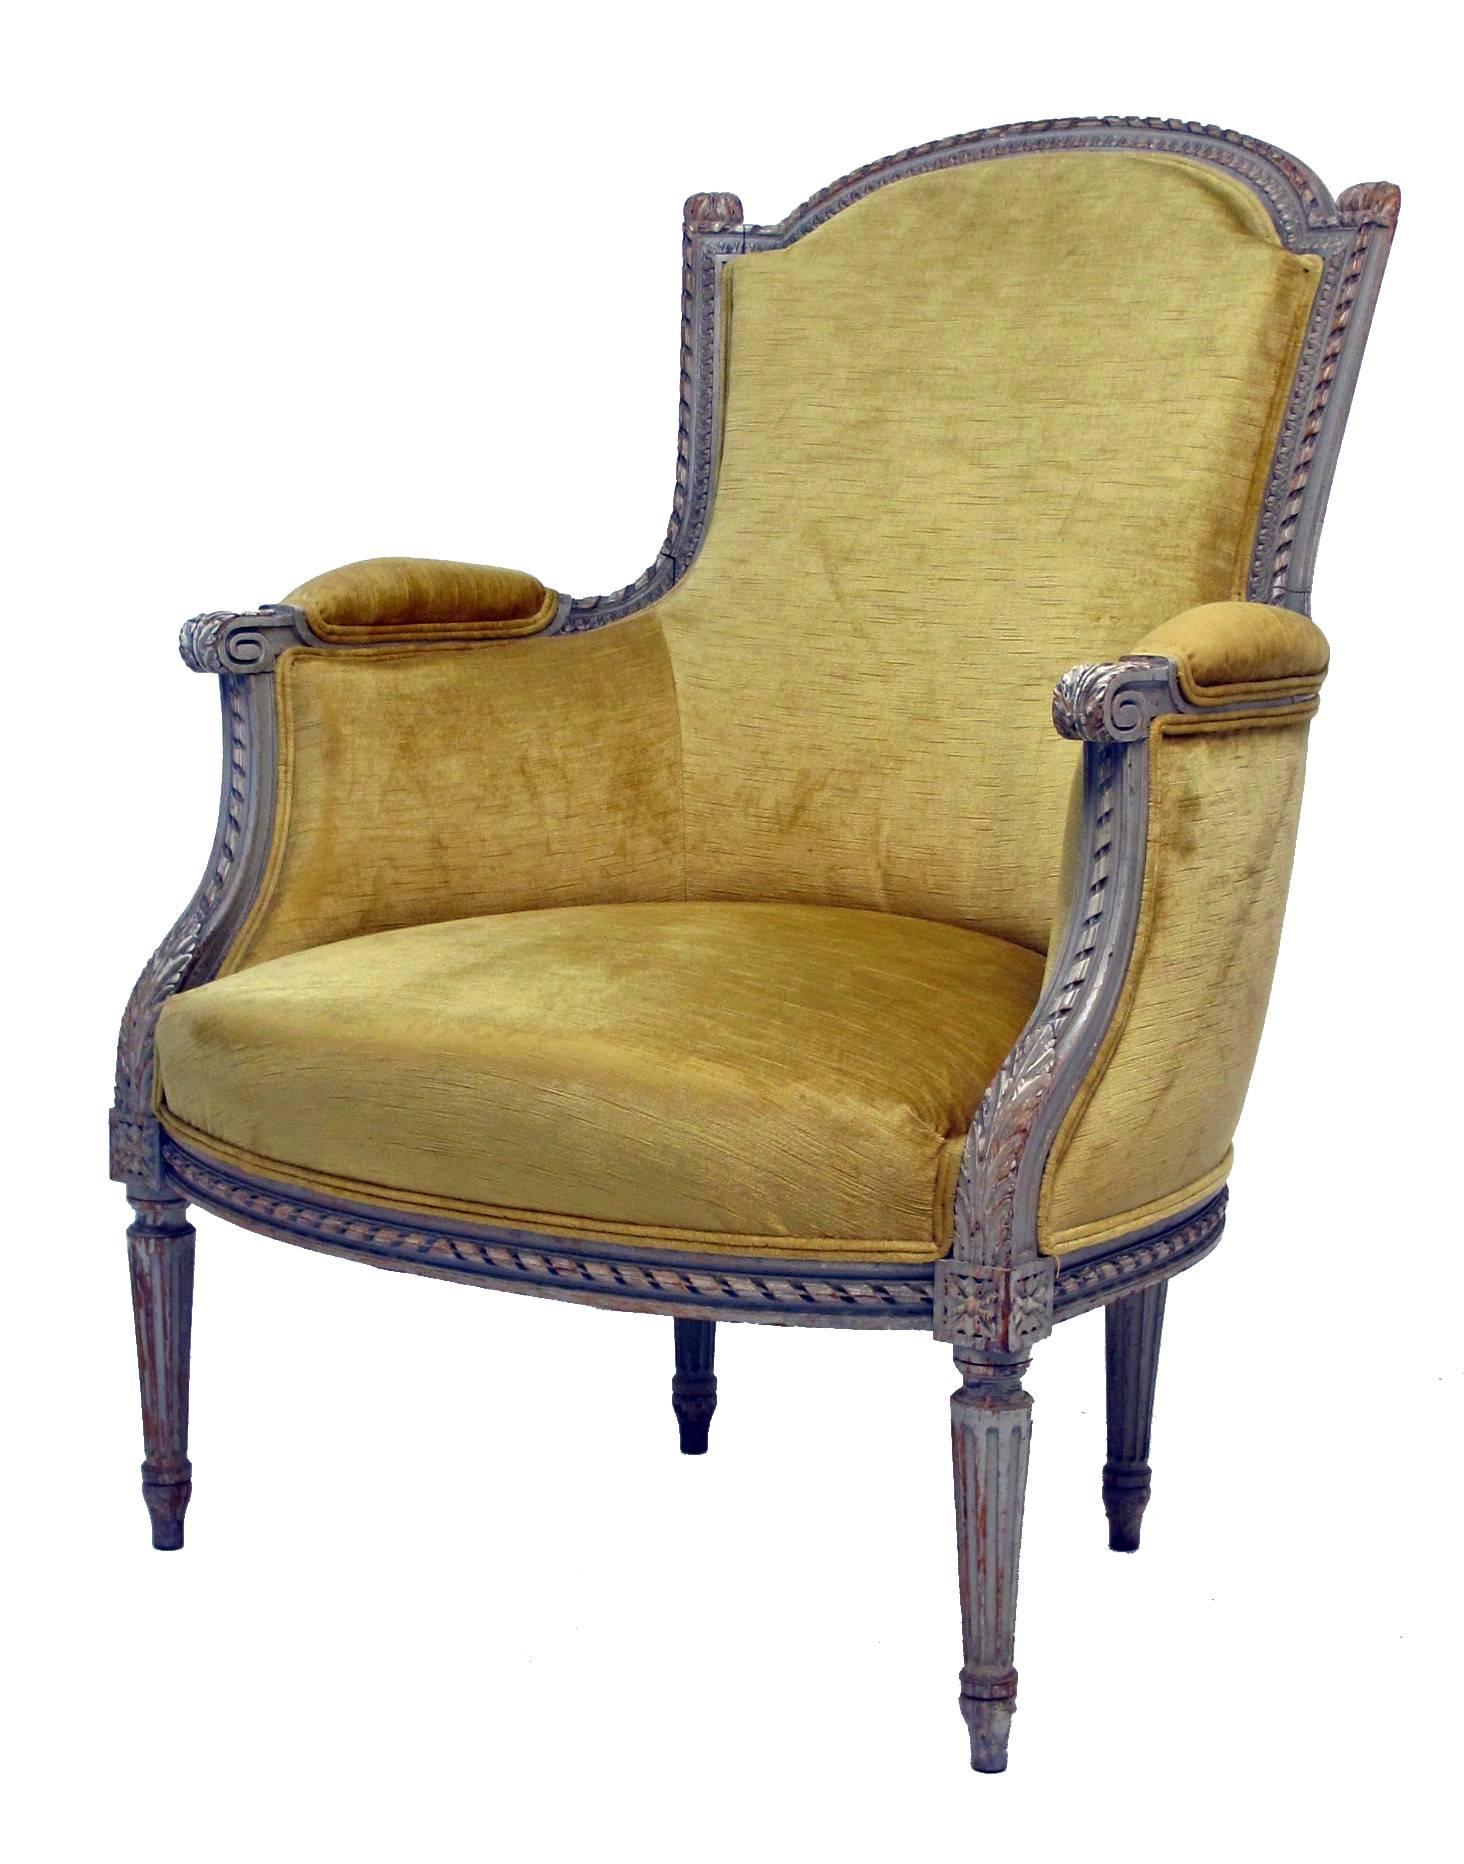 A remarkably comfortable hand-carved and hand-painted armchair or Louis XVI style bergere chair with ottoman, upholstered in slightly worn silk velvet fabric. Ottoman measures 16